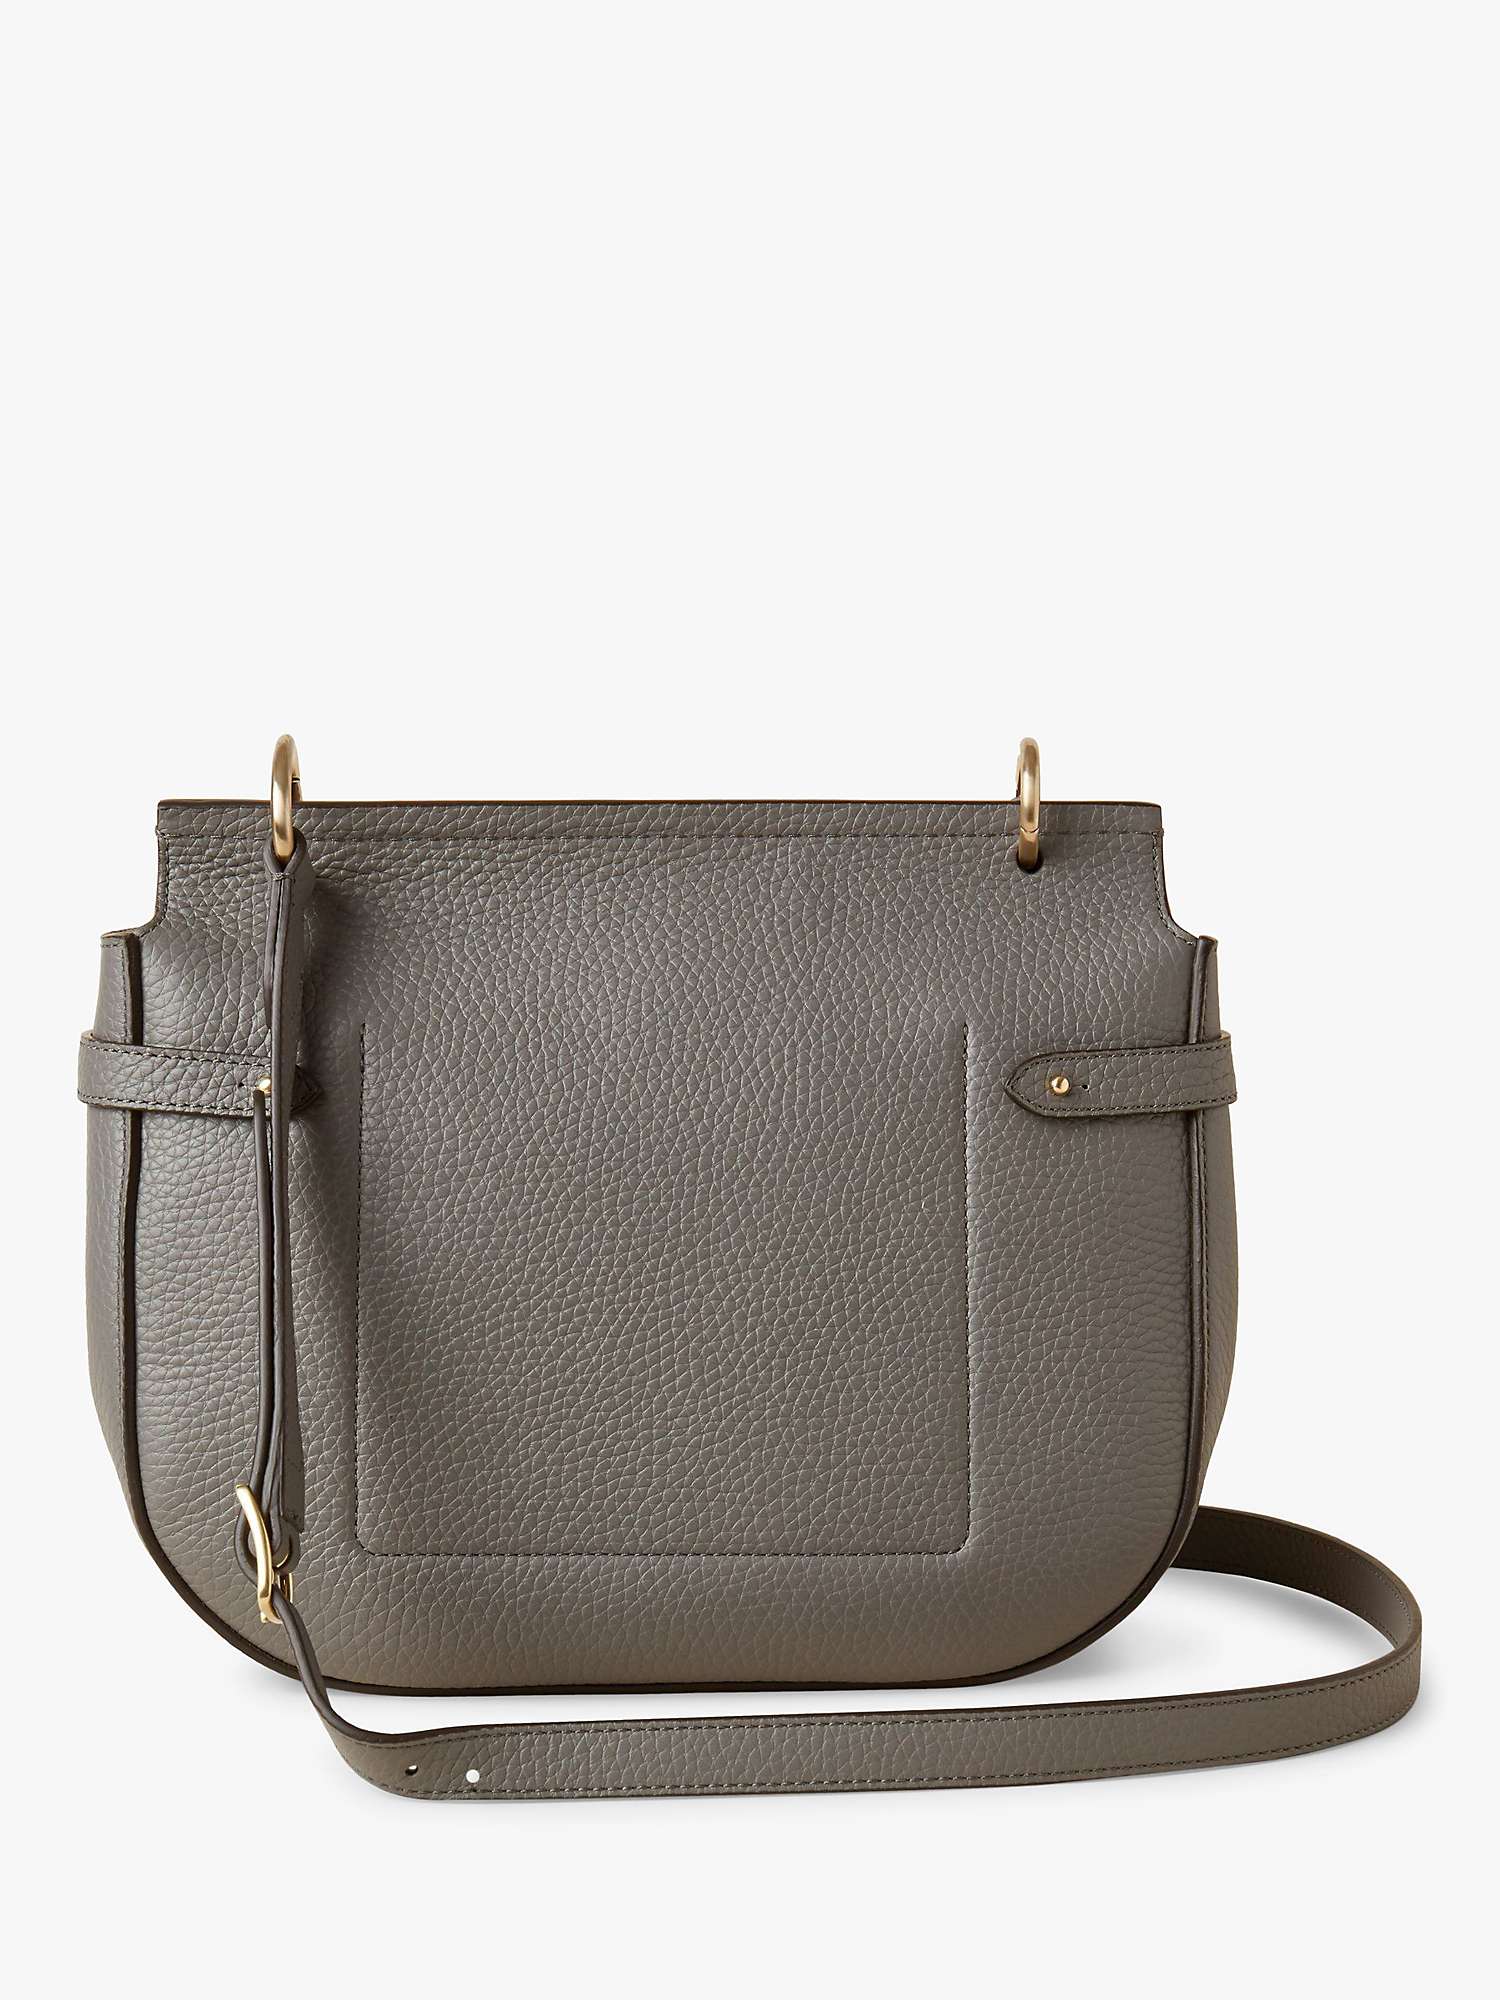 Buy Mulberry Soft Amberley Heavy Grain Leather Satchel Bag Online at johnlewis.com